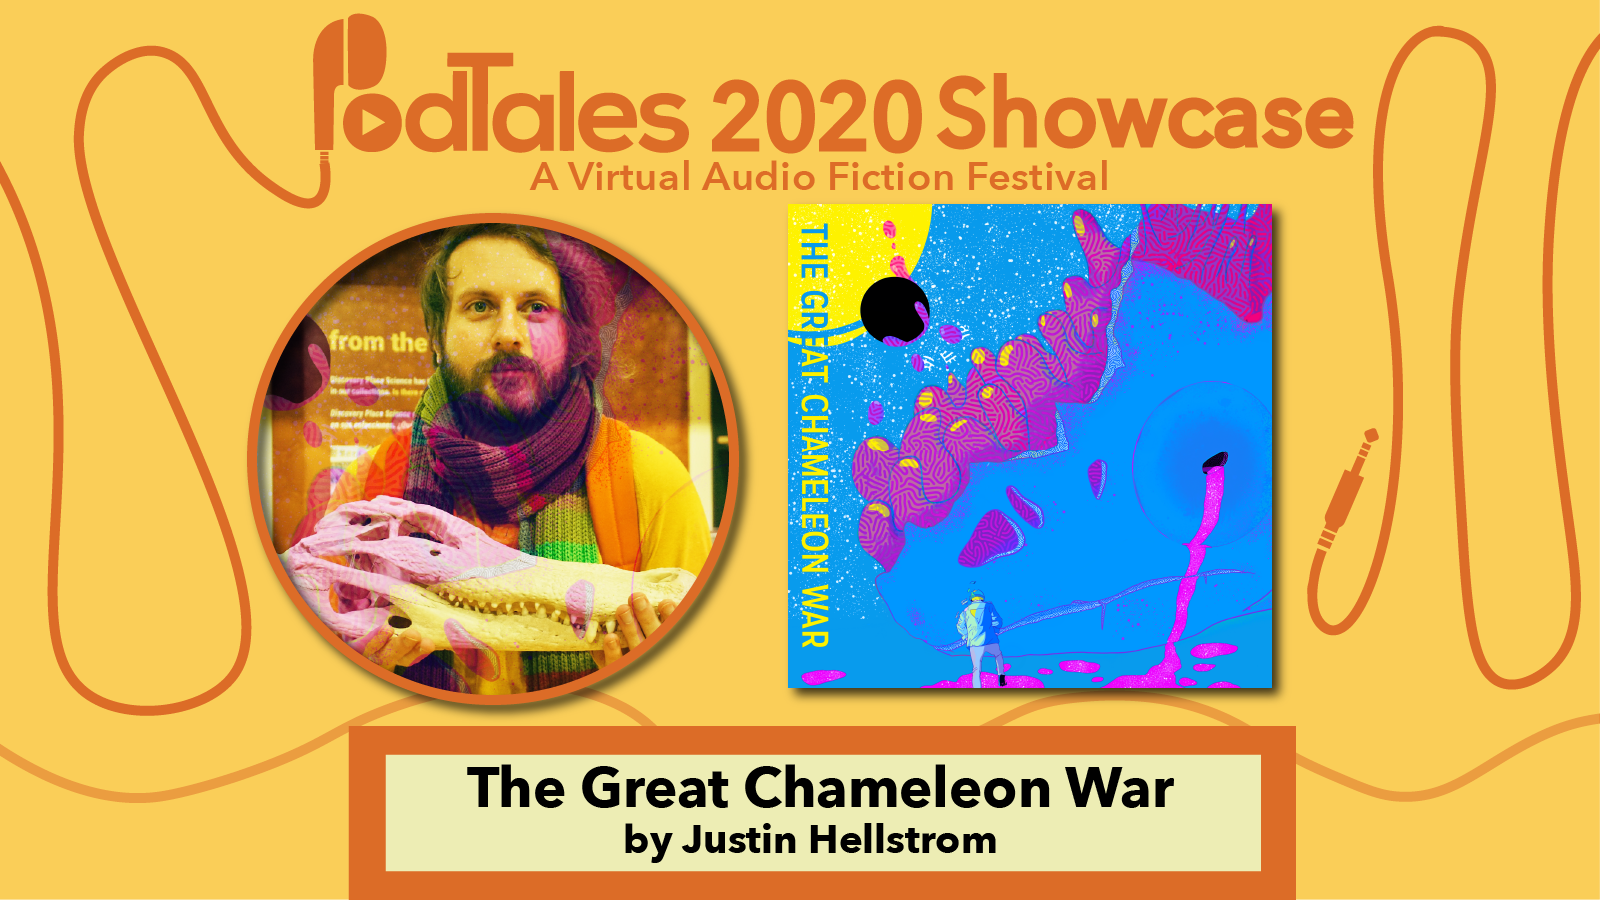 Text reading “PodTales 2020 Showcase: A Virtual Audio Fiction Festival”, Photo of Justin Hellstrom, The Great Chameleon War Show Art, Text reading “The Great Chameleon War by Justin Hellstrom”